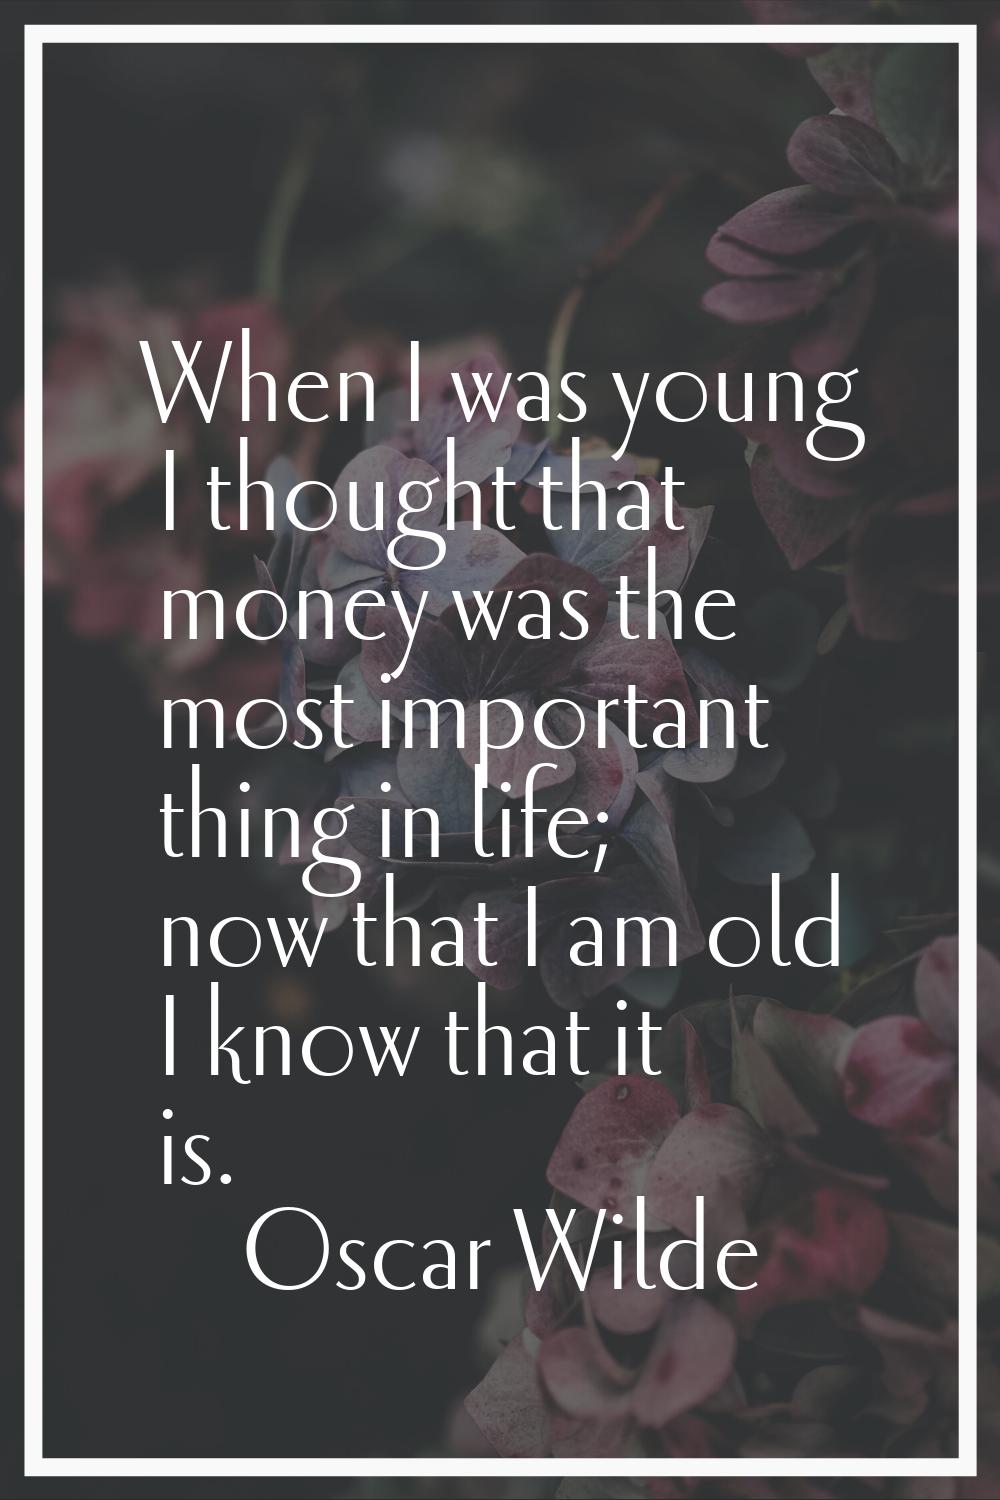 When I was young I thought that money was the most important thing in life; now that I am old I kno